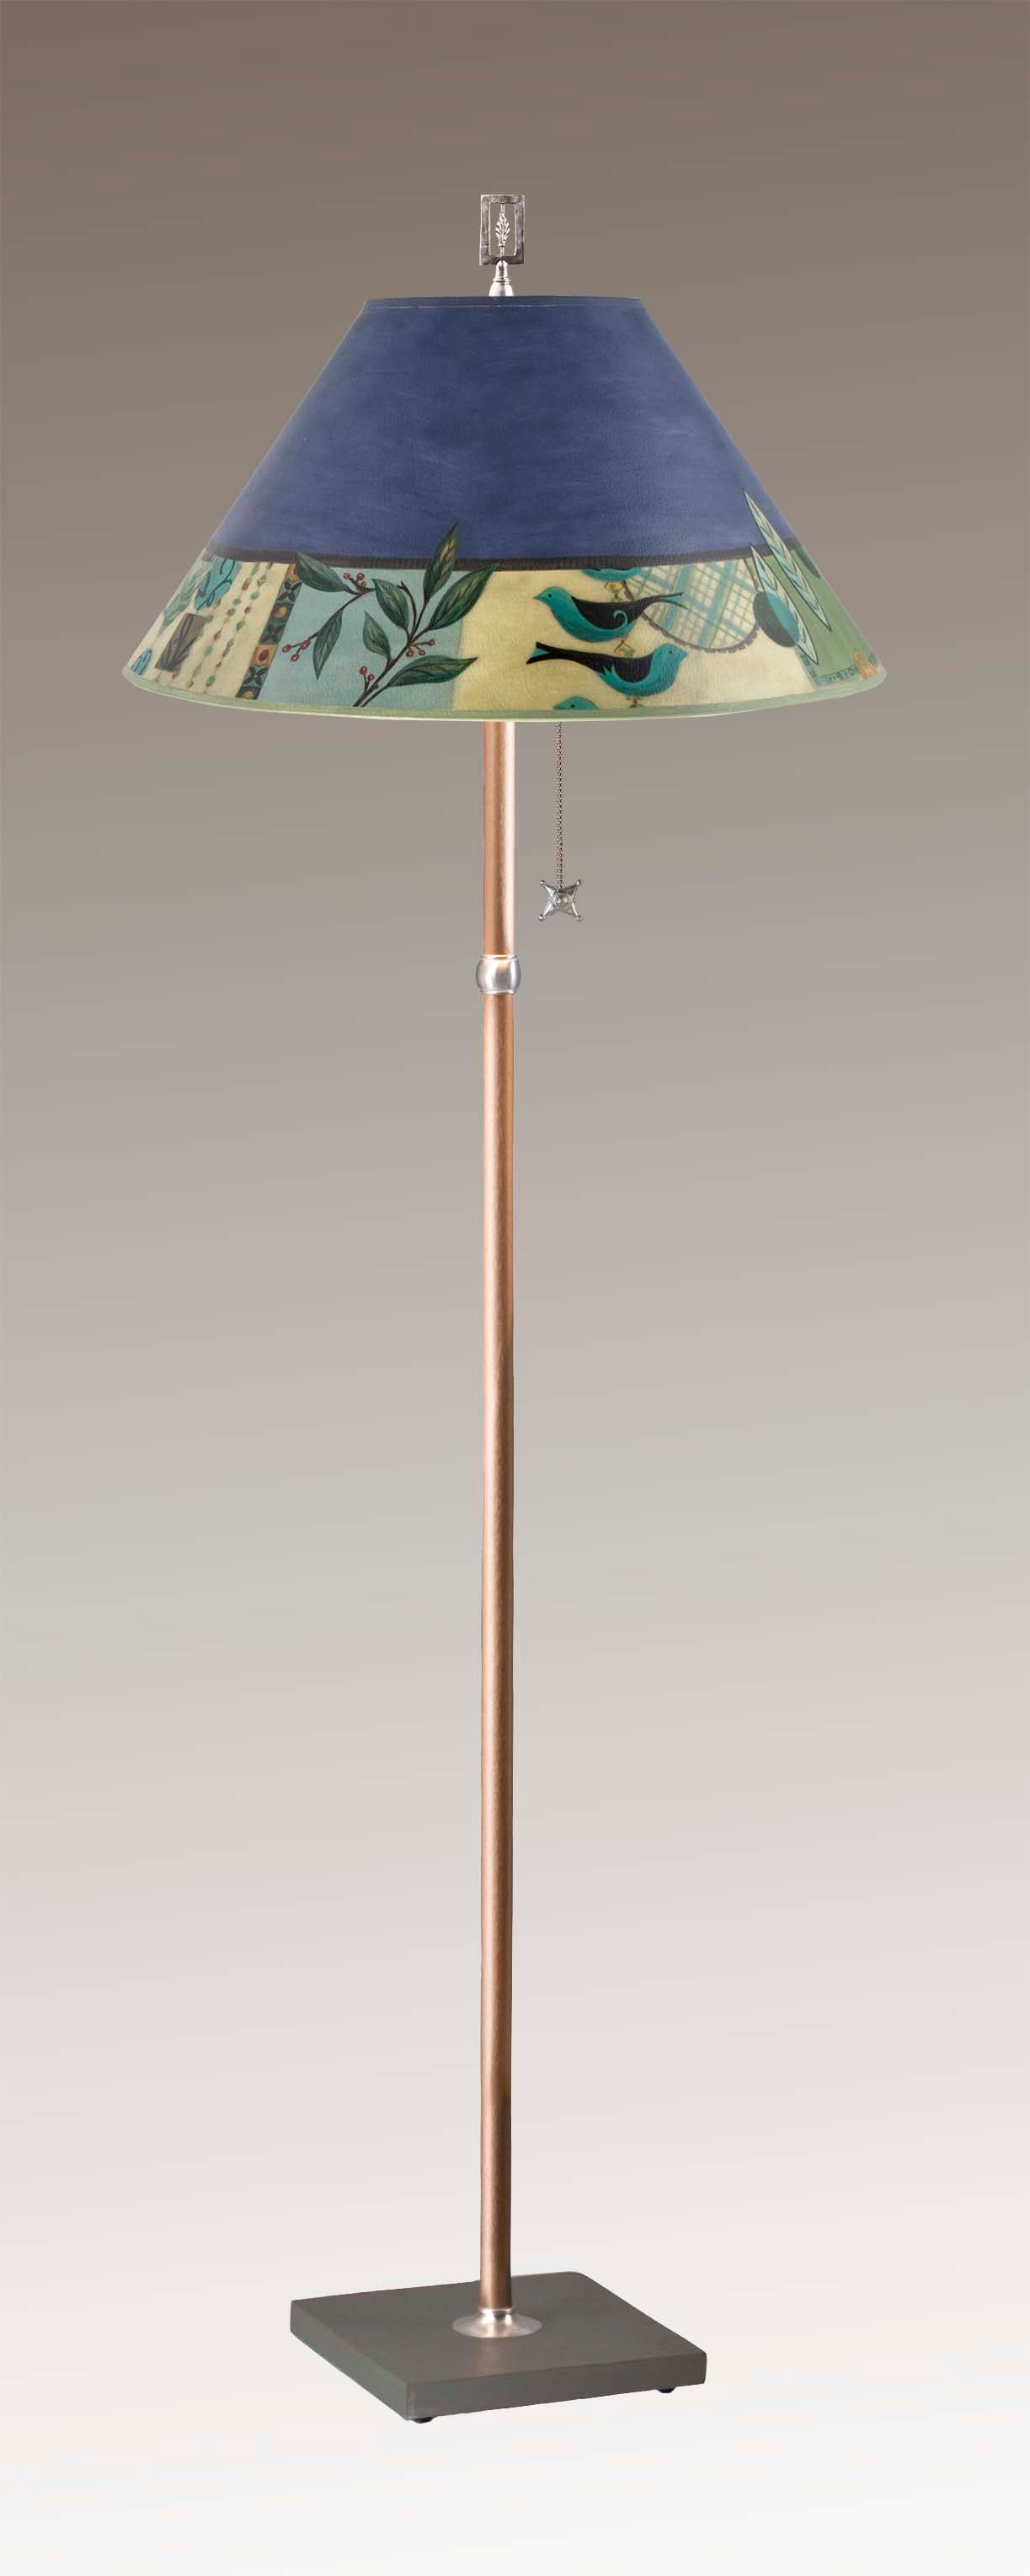 Janna Ugone & Co Floor Lamps Copper Floor Lamp with Large Conical Shade in New Capri Periwinkle